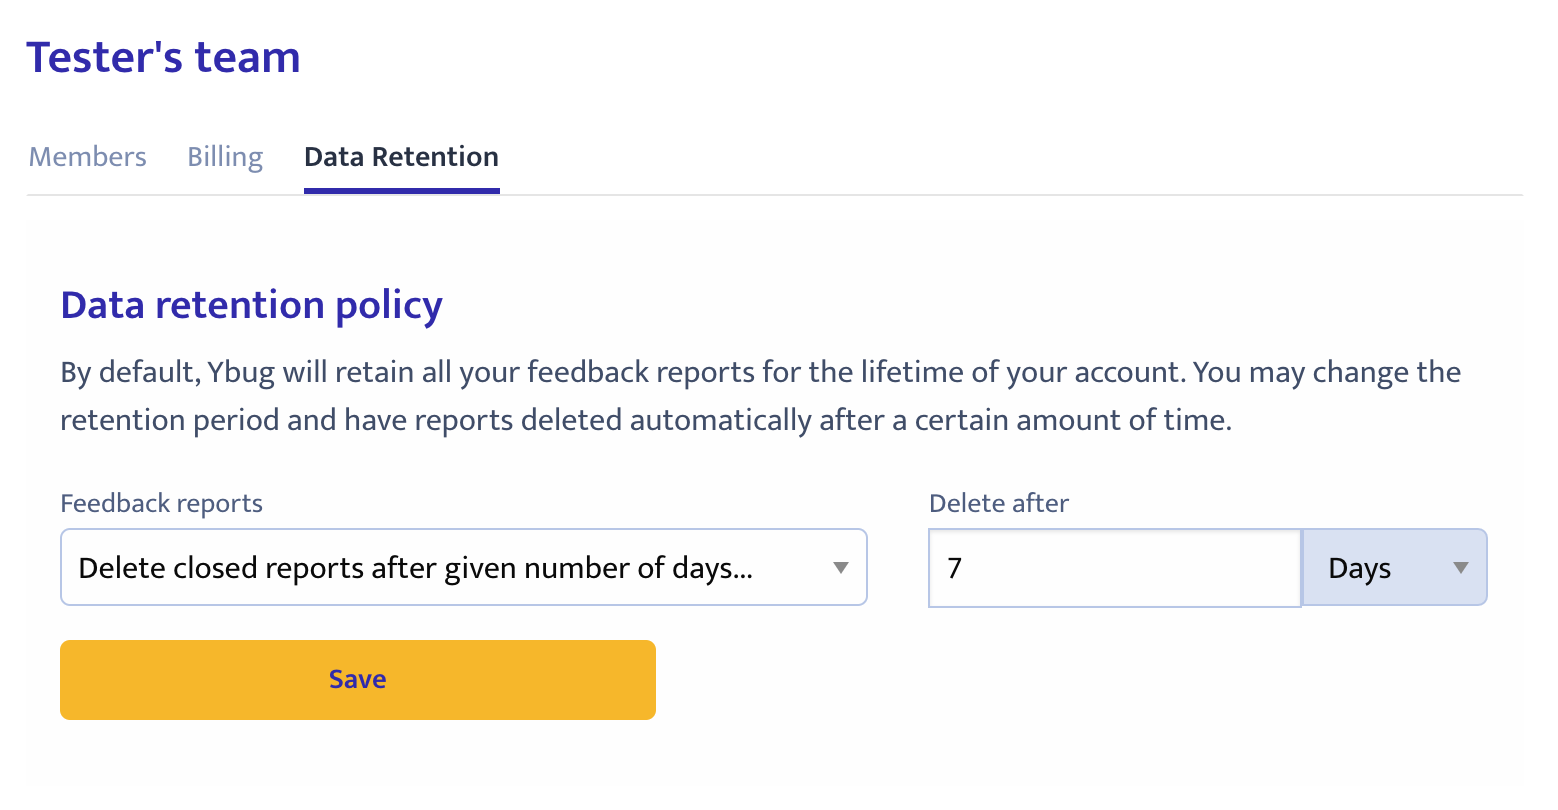 Data retention policy settings